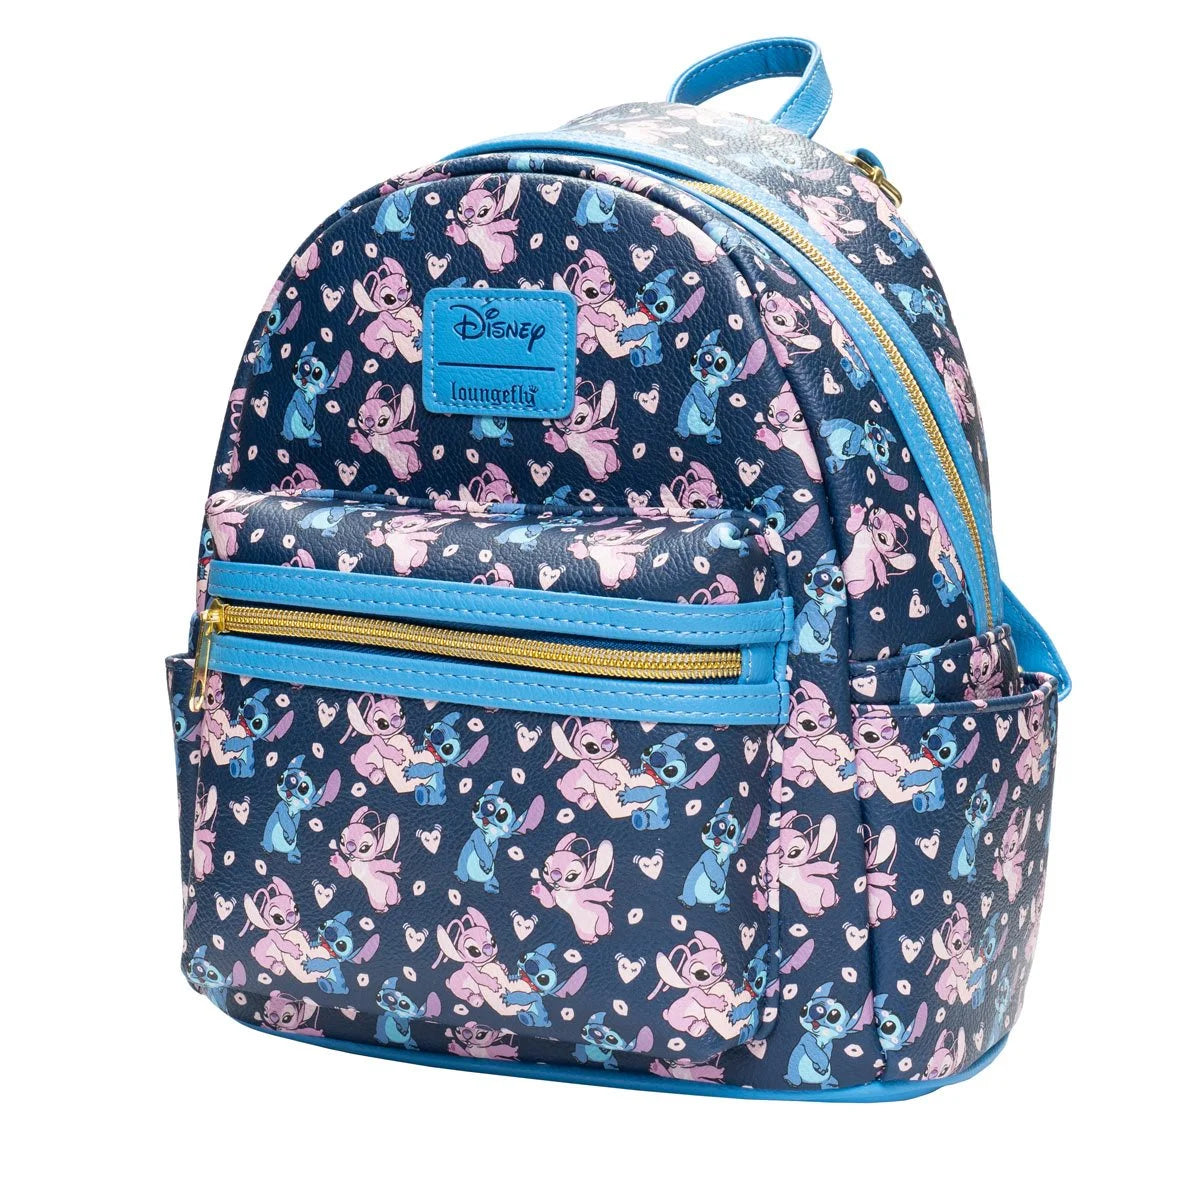 Stitch and Angel from Lilo & Stitch Hearts Mini-Backpack